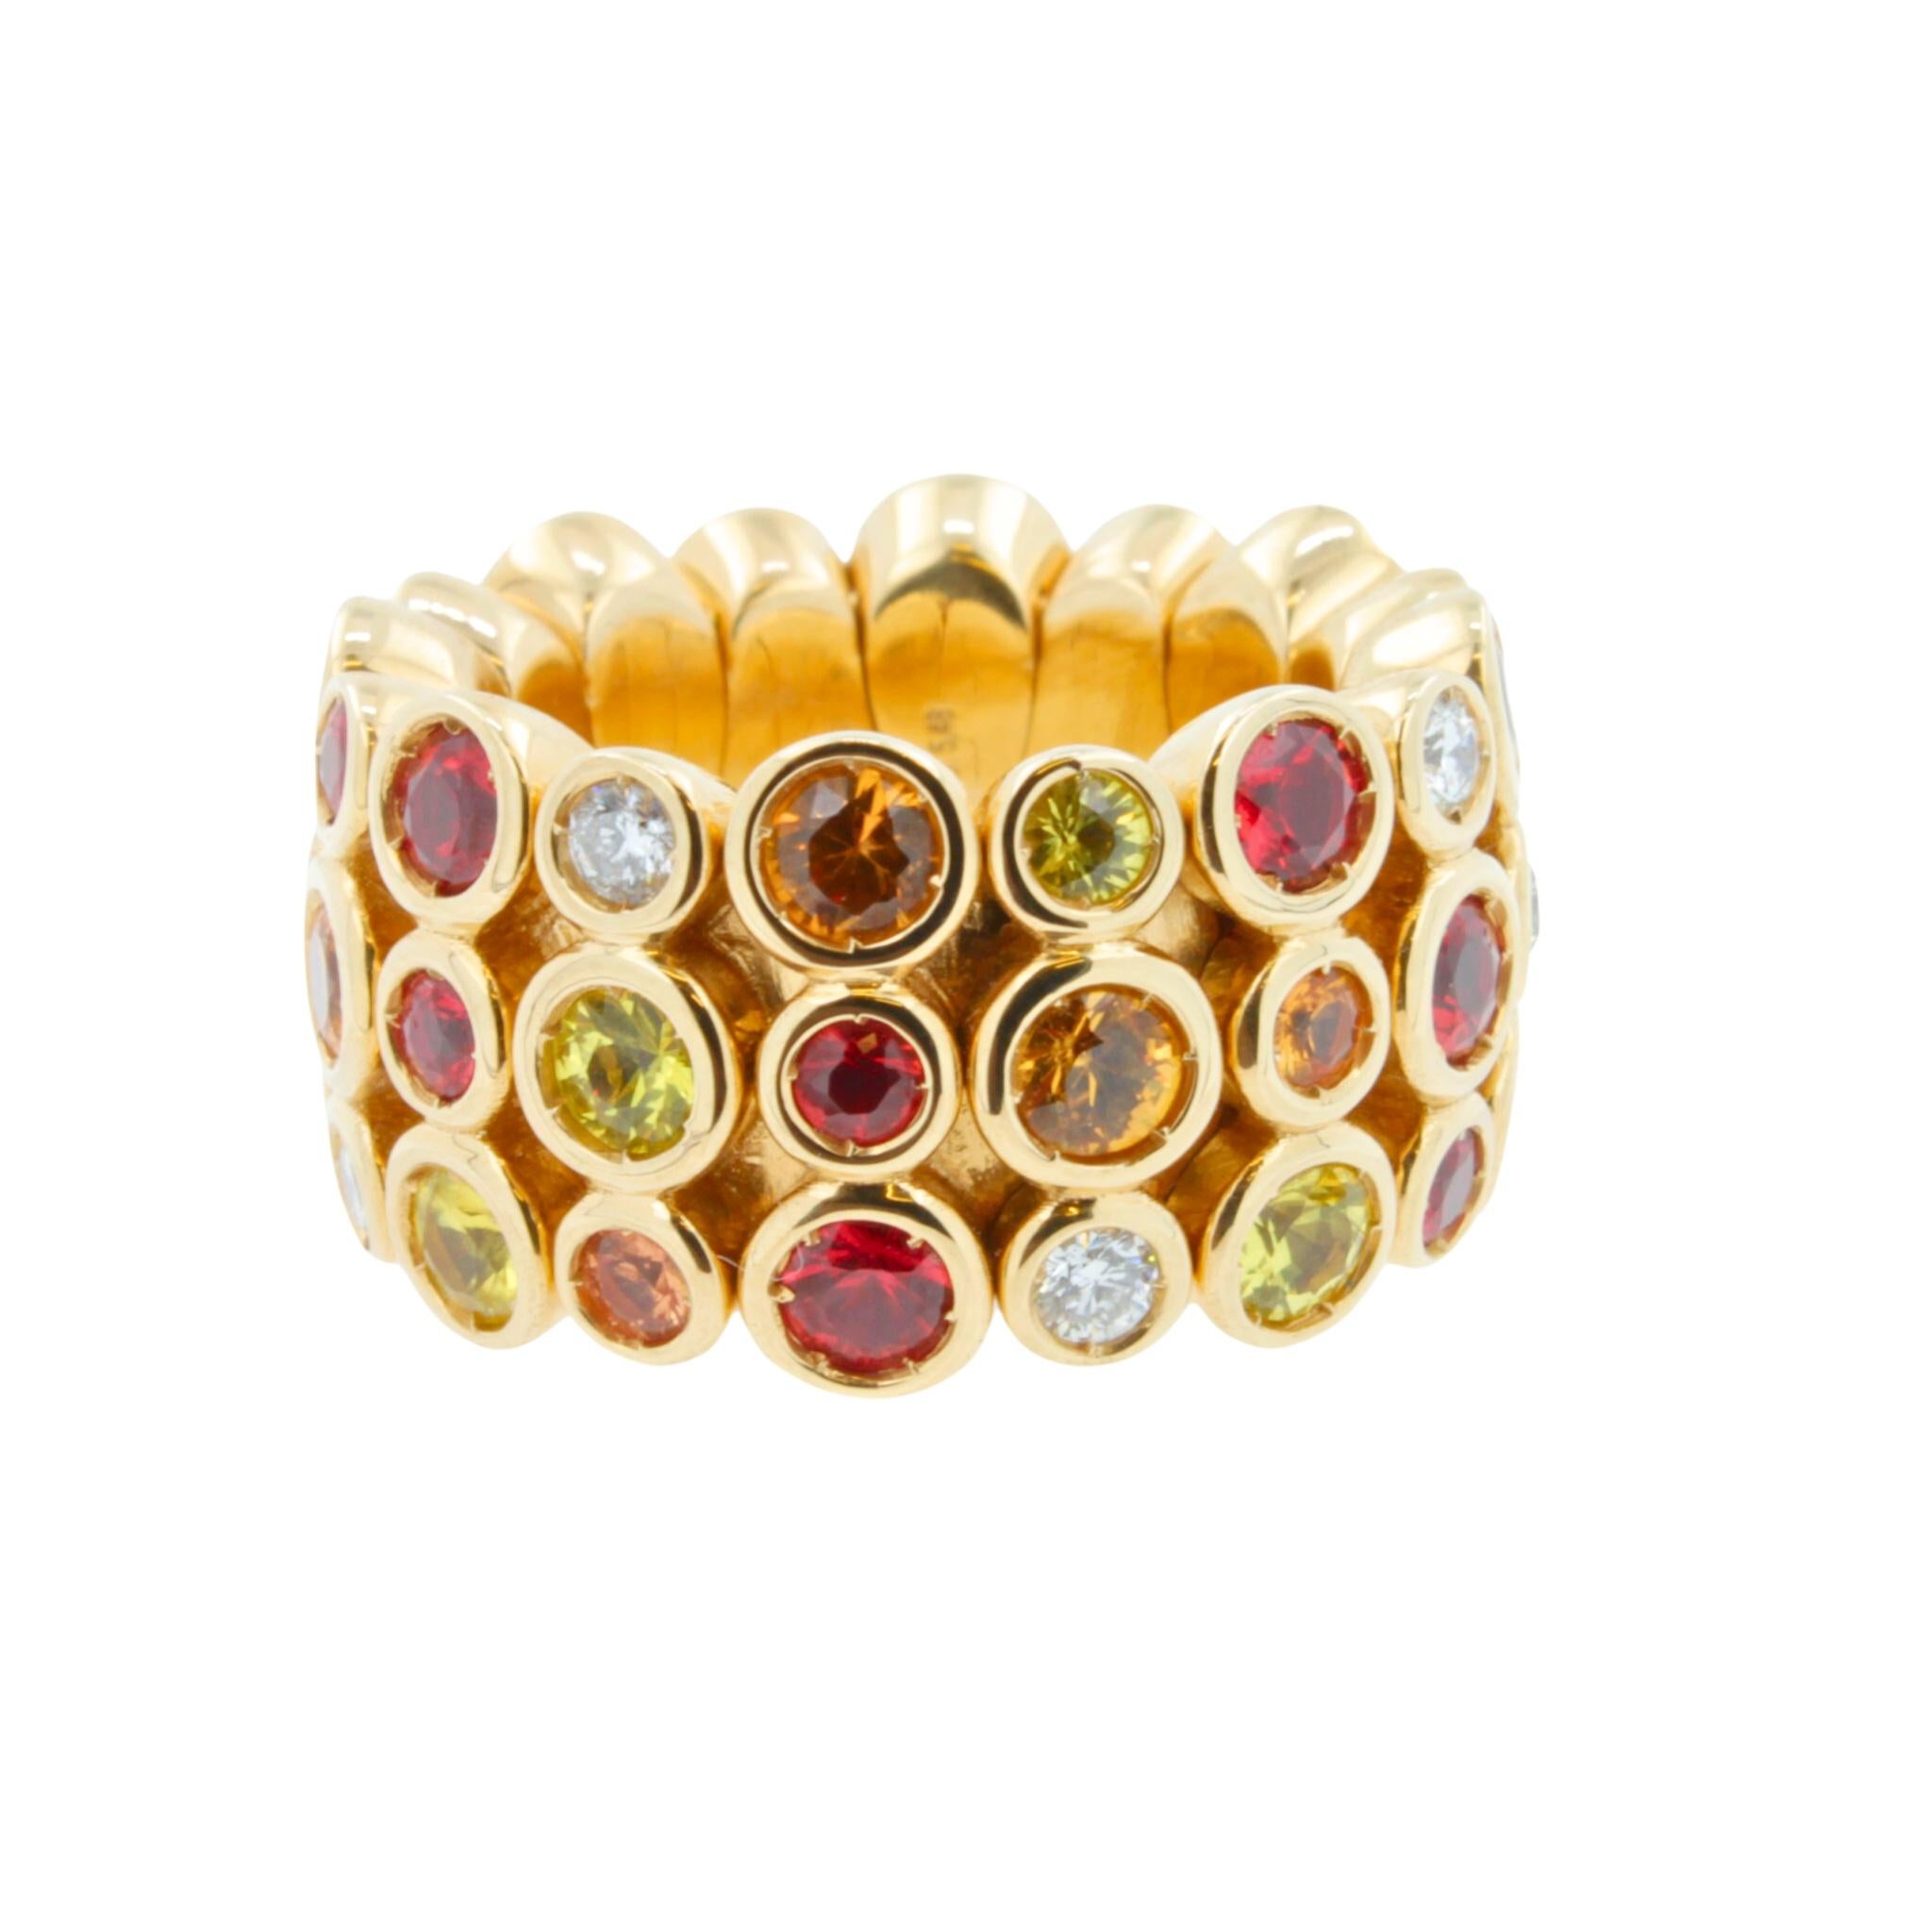 Modern Round Sapphires, Rubies & Diamonds Ring Set in 18K Yellow Gold For Sale 2